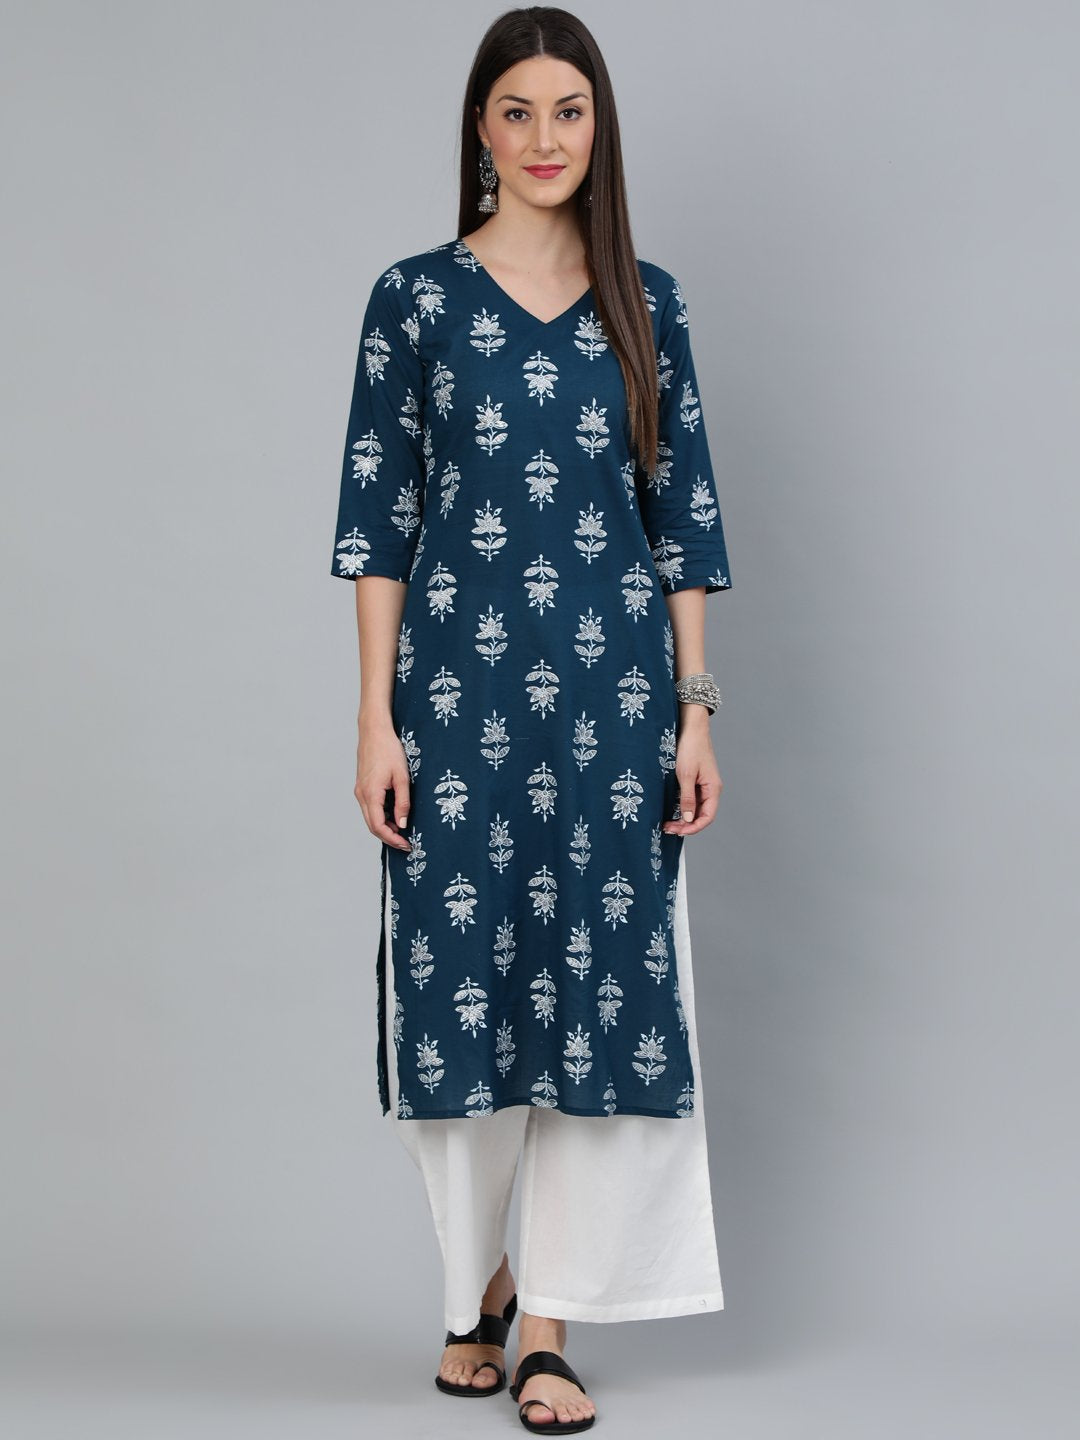 Women's Teal Blue & Silver Printed Straight Kurta With Three Quarters Sleeves - Nayo Clothing